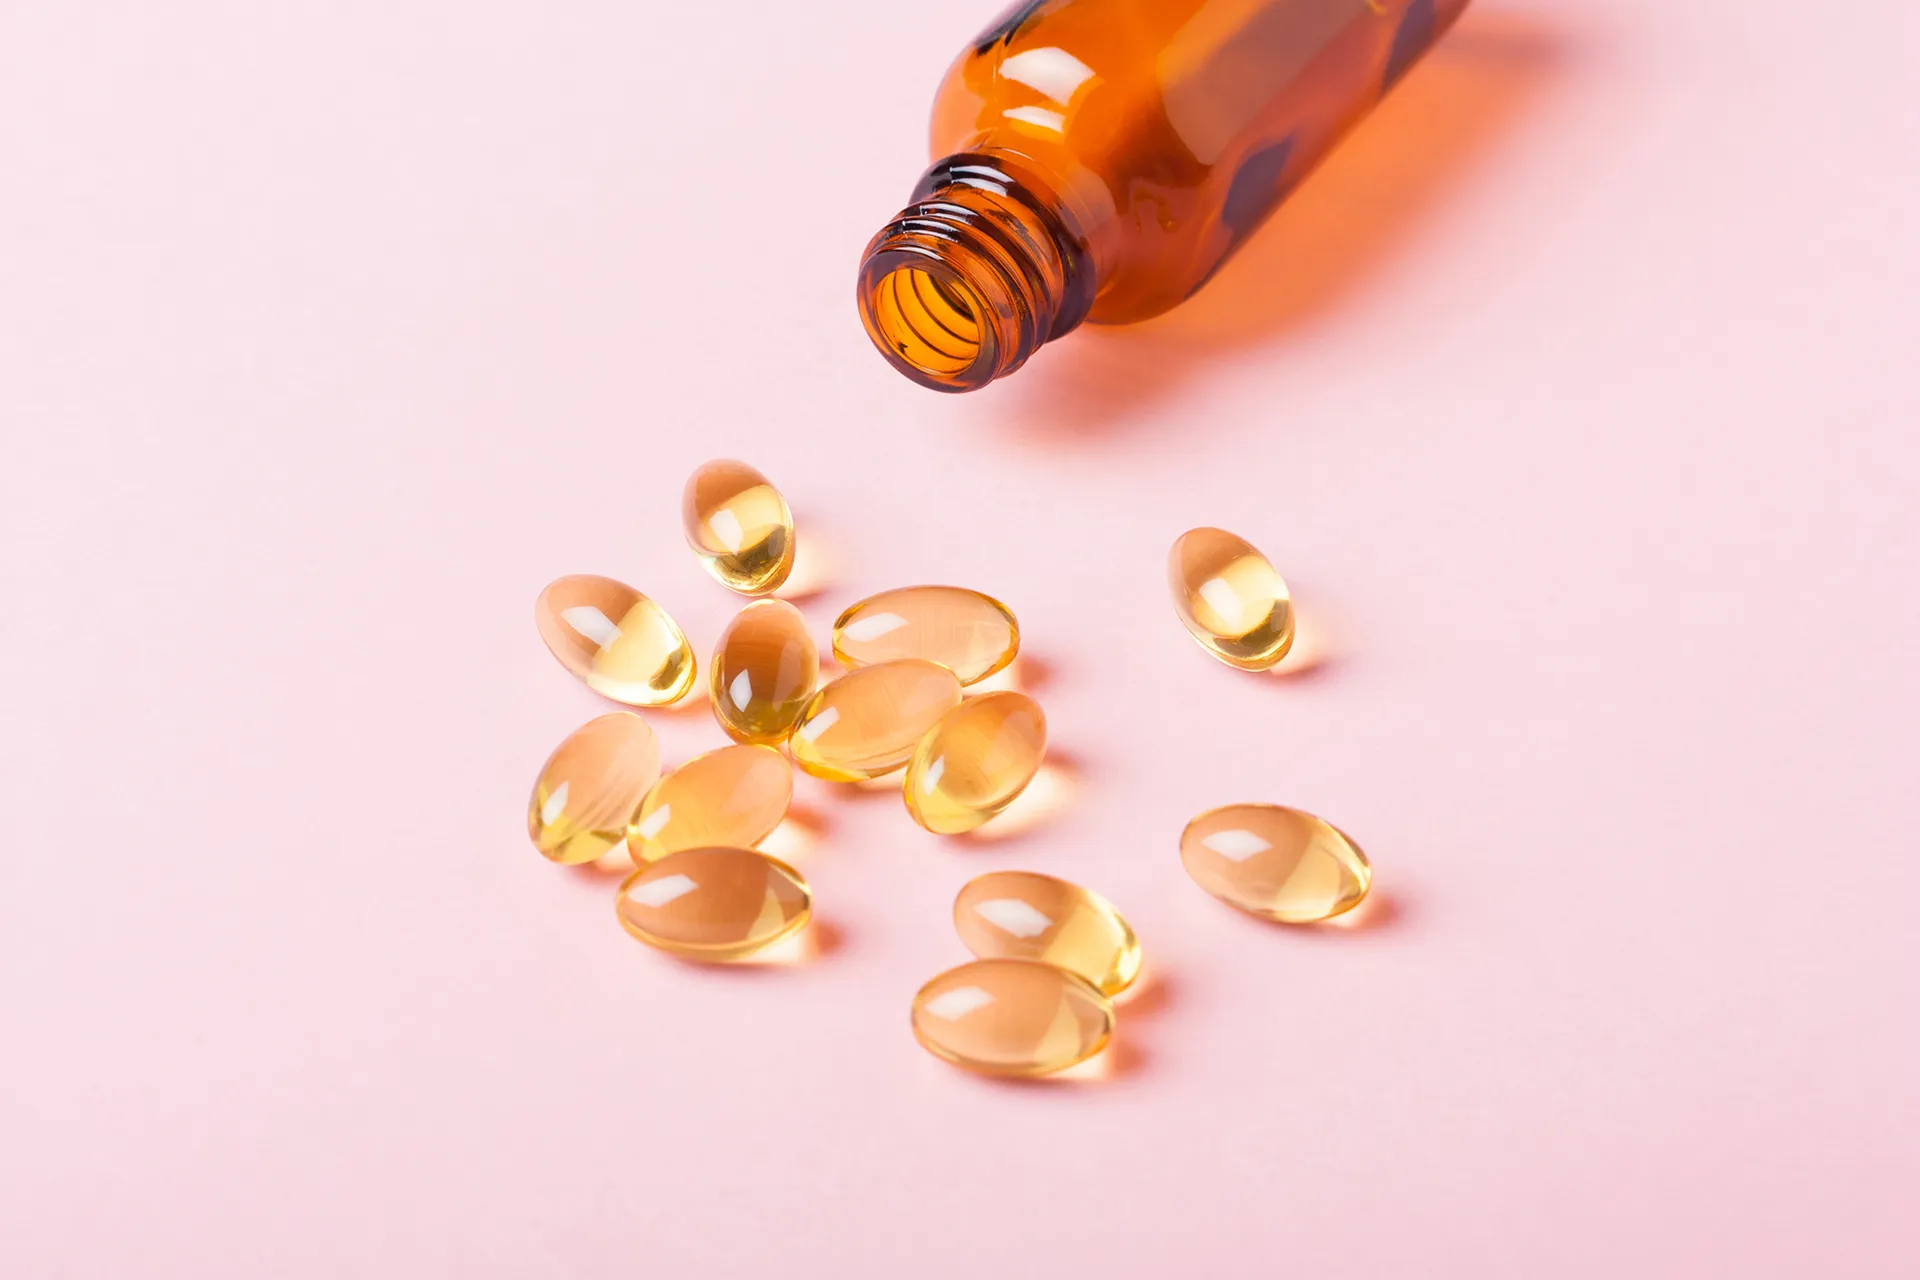 Fish Oil Benefits - Supplements, Foods, Uses, Side Effects